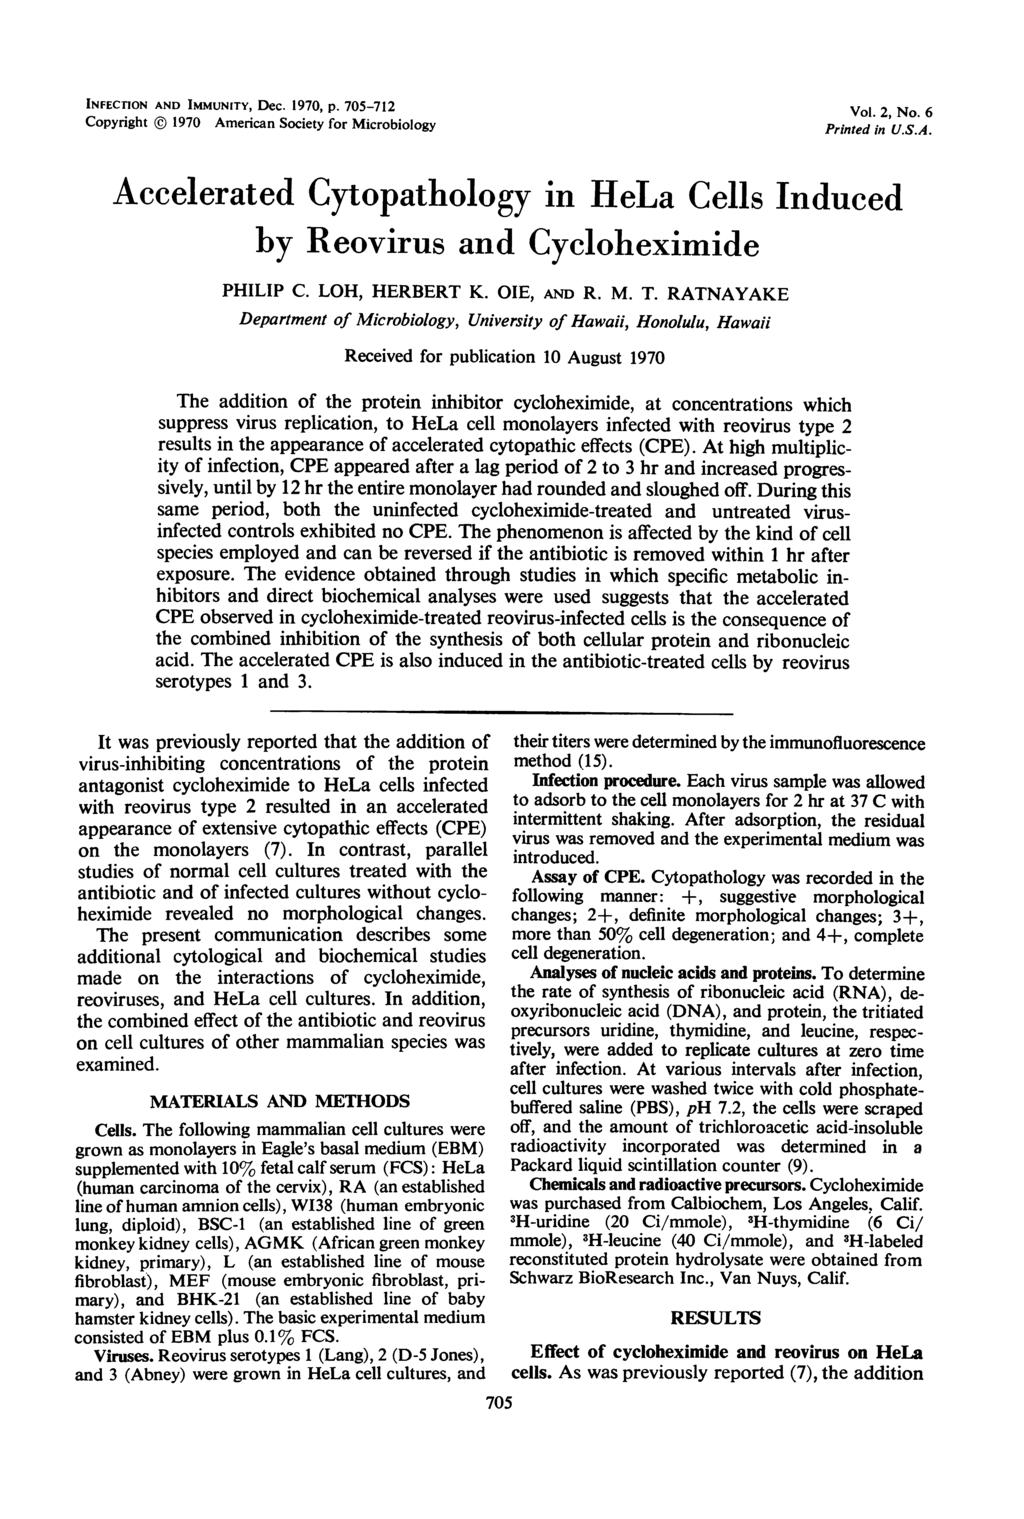 INFECTION AND IMMUNITY, Dec. 197, p. 75-71 Copyright 197 American Society for Microbiology Vol., No. Printed in U.S.A. Accelerated Cytopathology in HeLa Cells Induced by Reovirus and Cycloheximide PHILIP C.